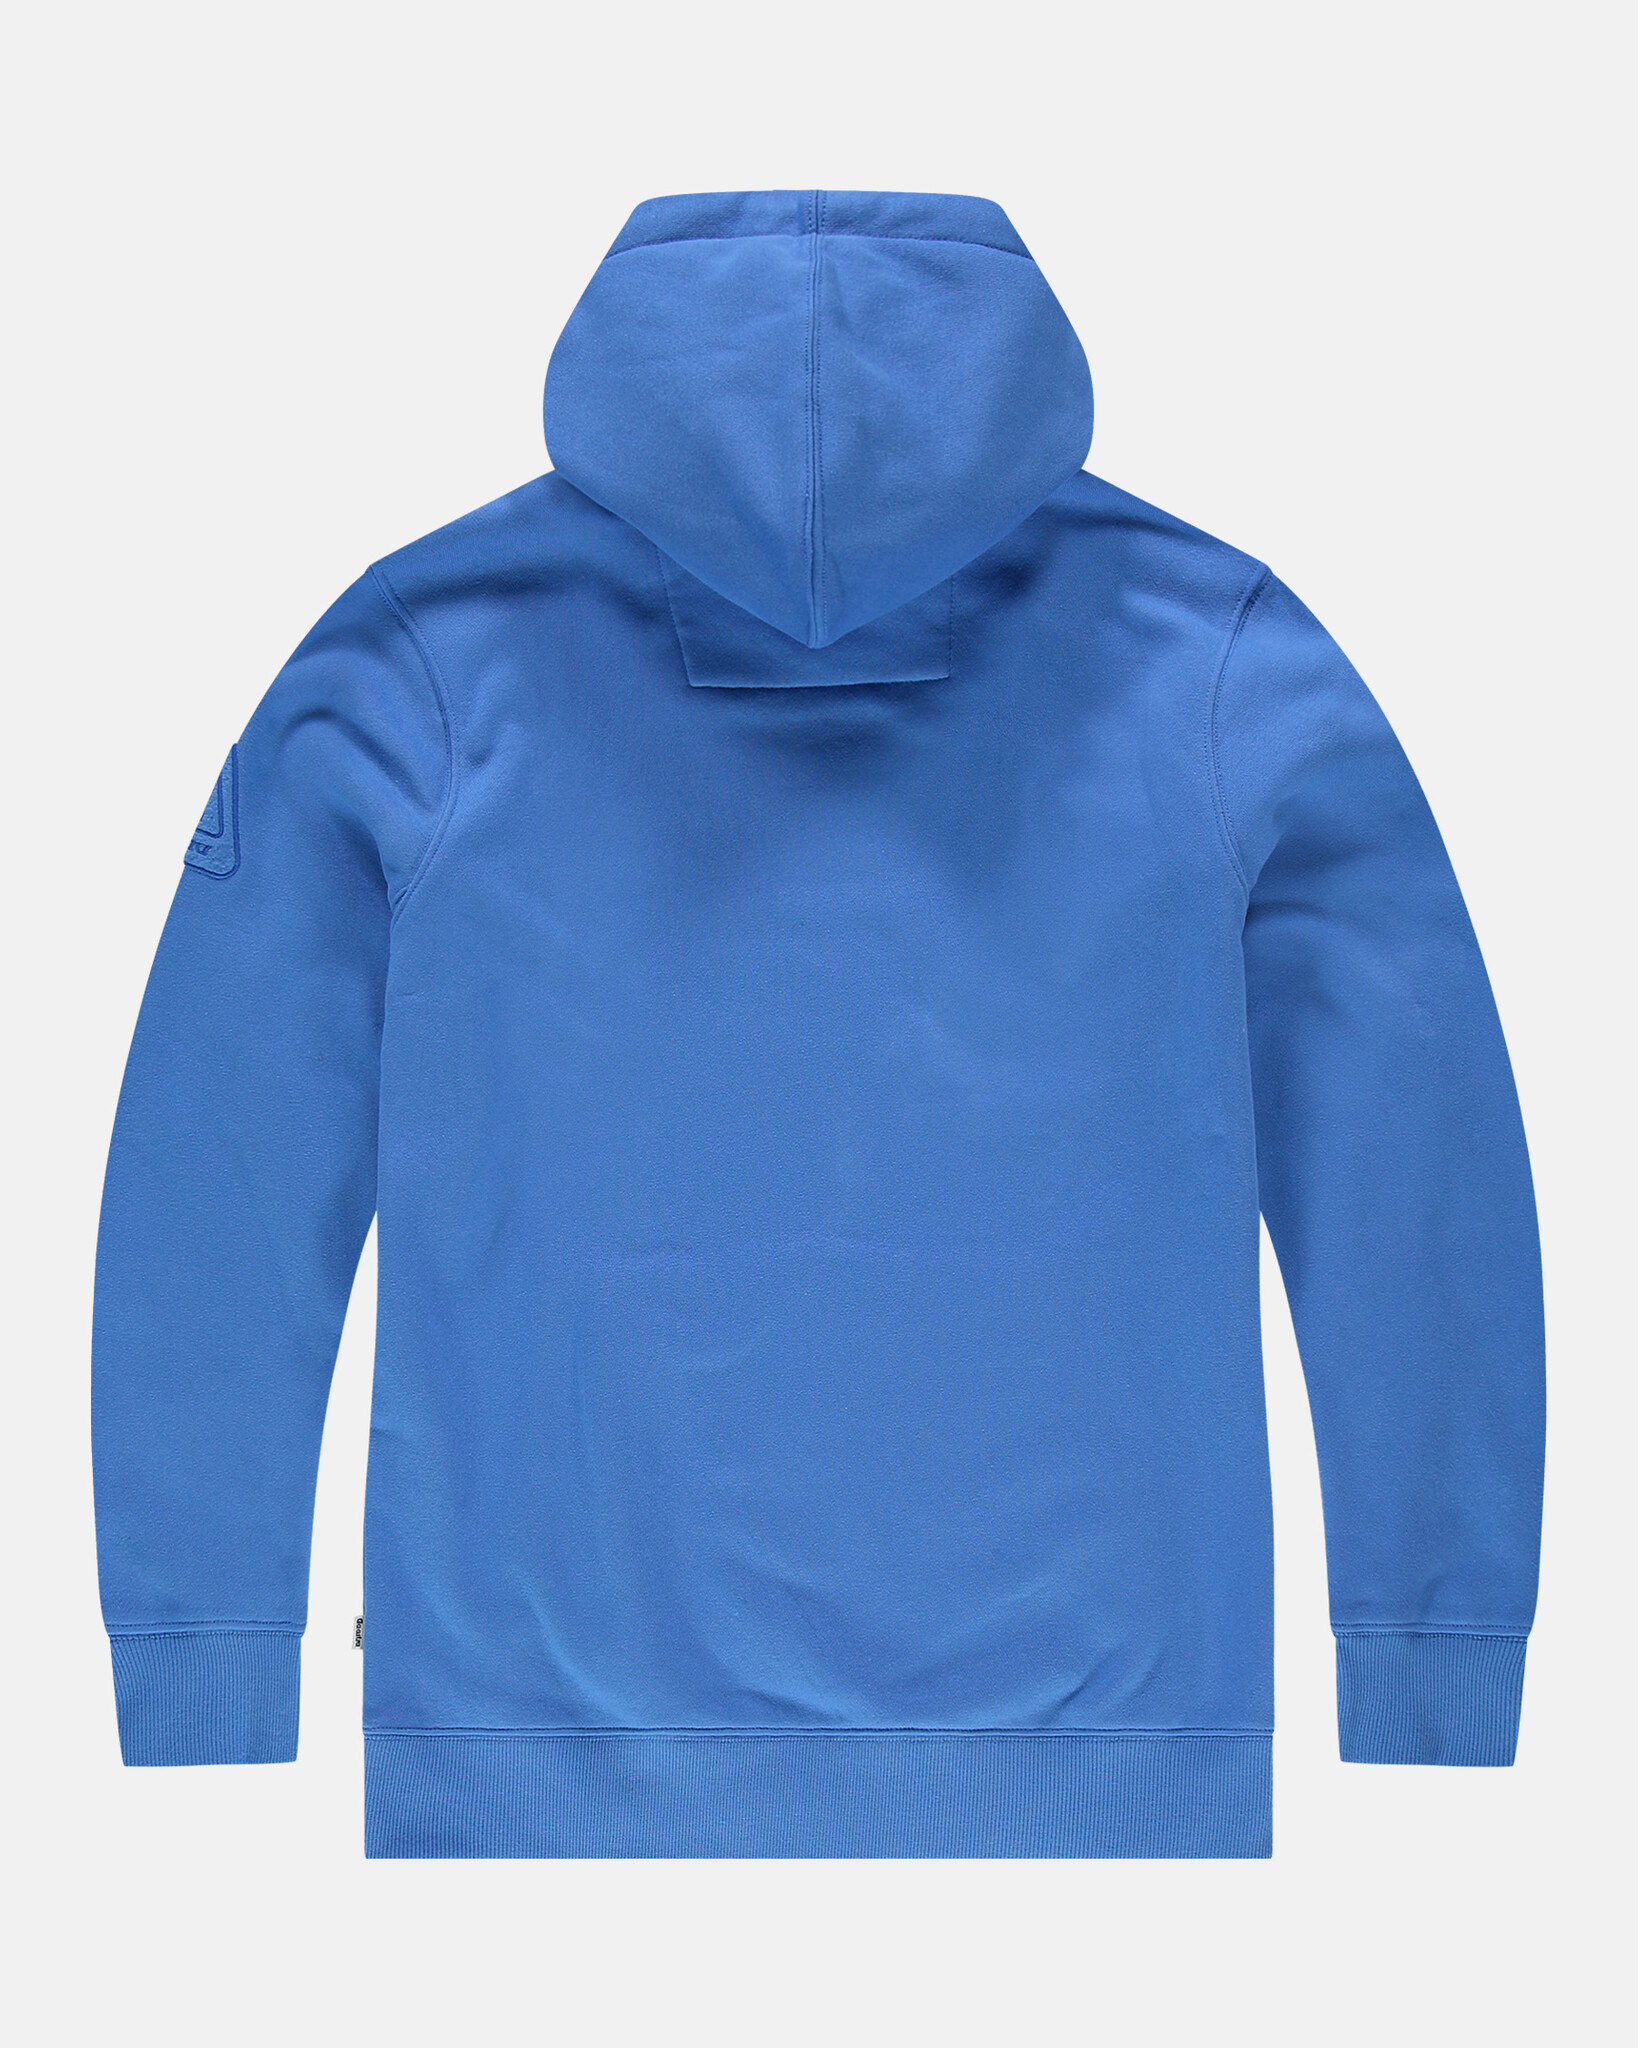 Hooded sweater with tone on tone embroidered Gaastra logo